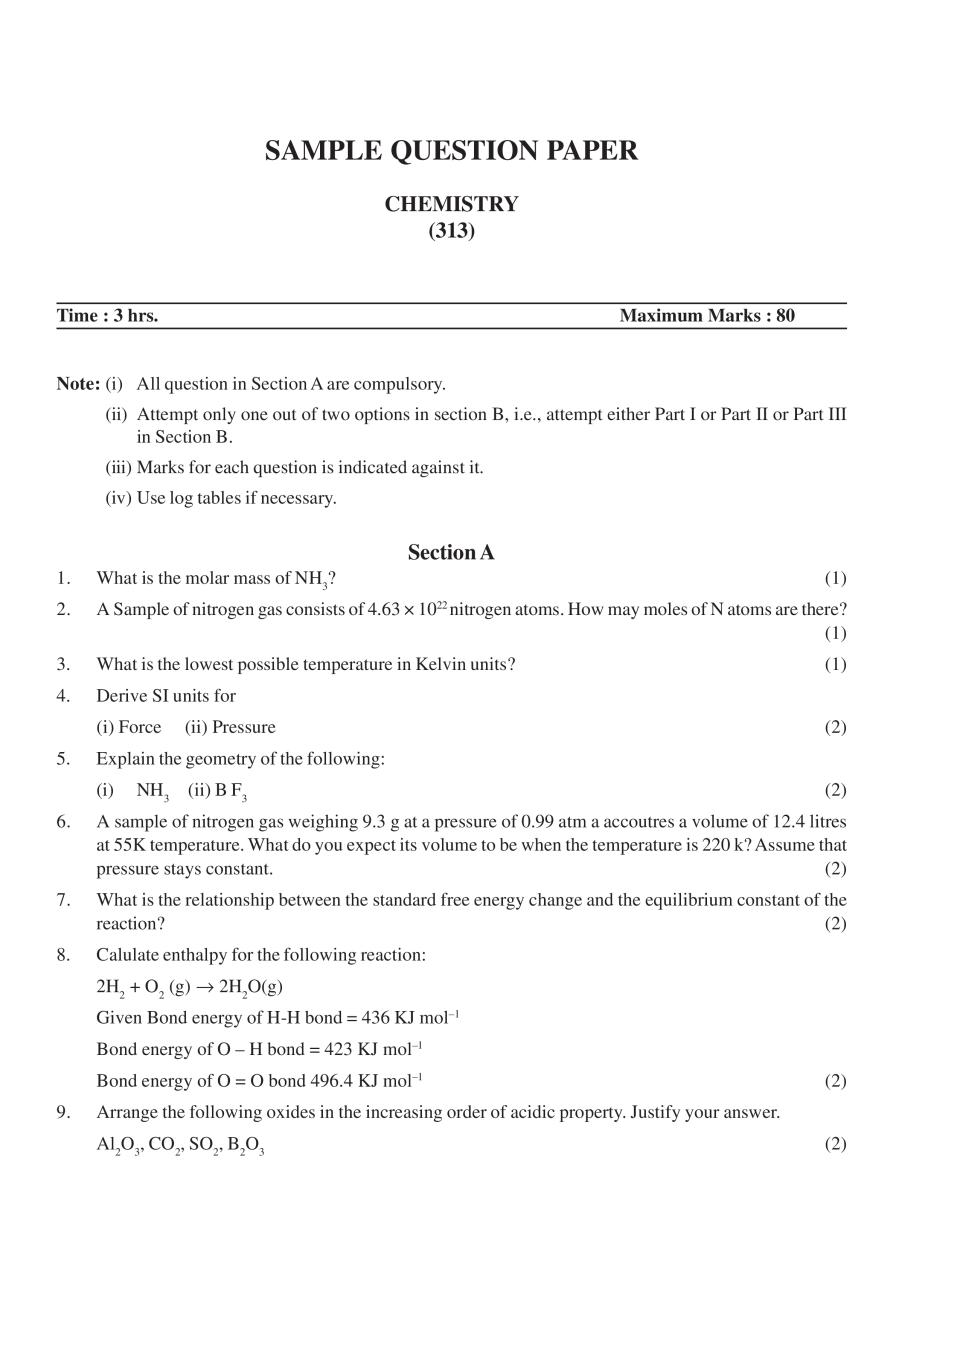 NIOS Class 12 Sample Paper 2020 - Chemistry - Page 1